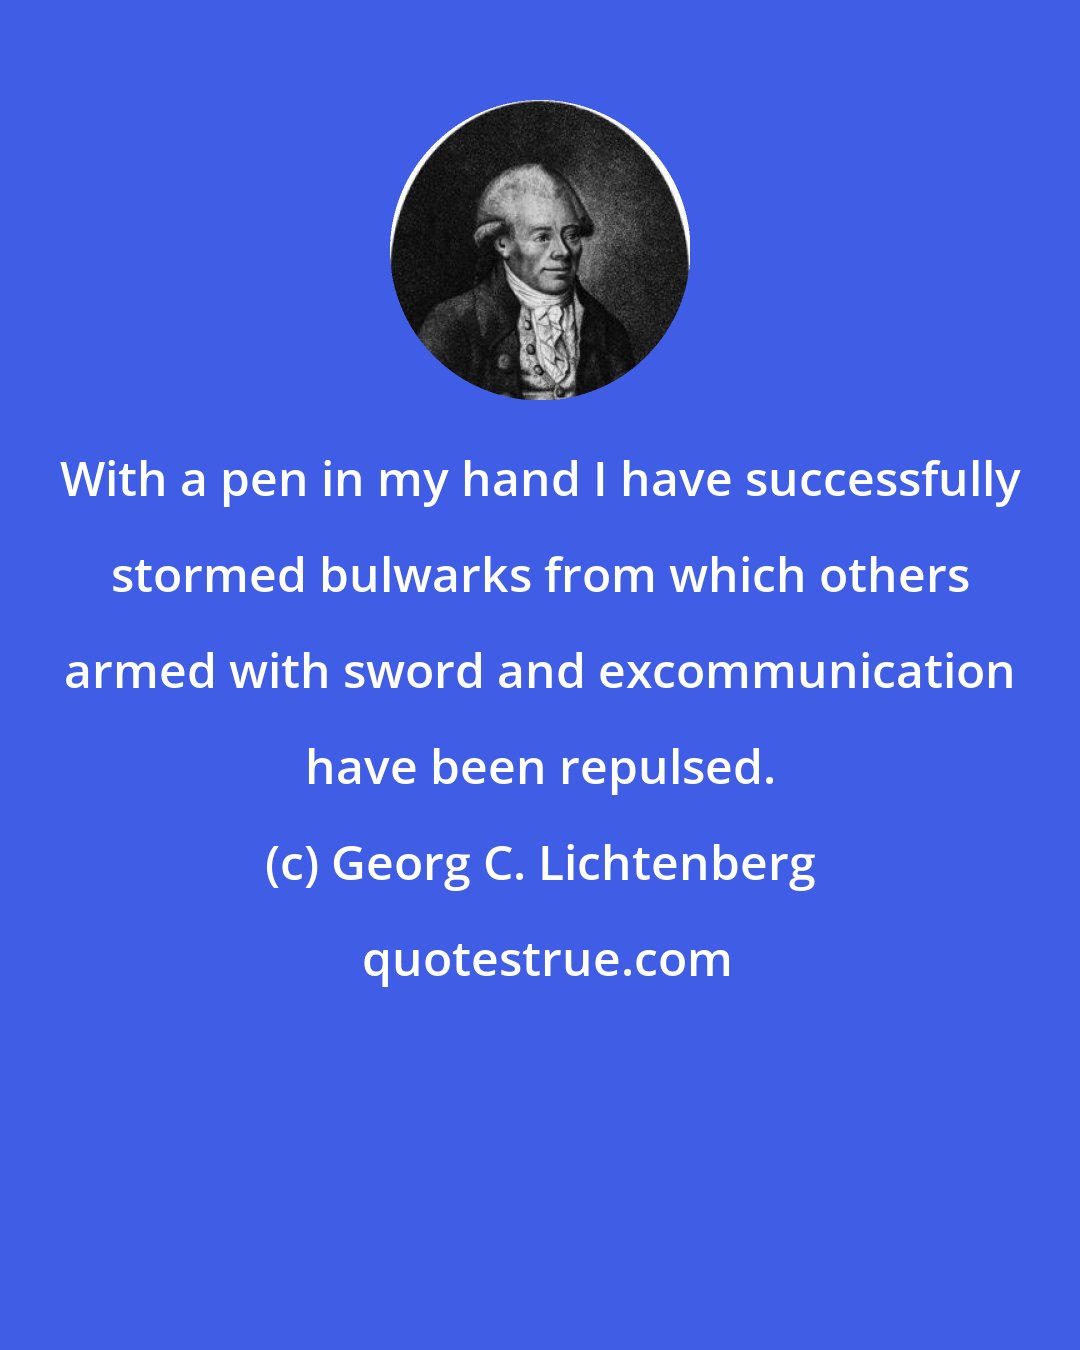 Georg C. Lichtenberg: With a pen in my hand I have successfully stormed bulwarks from which others armed with sword and excommunication have been repulsed.